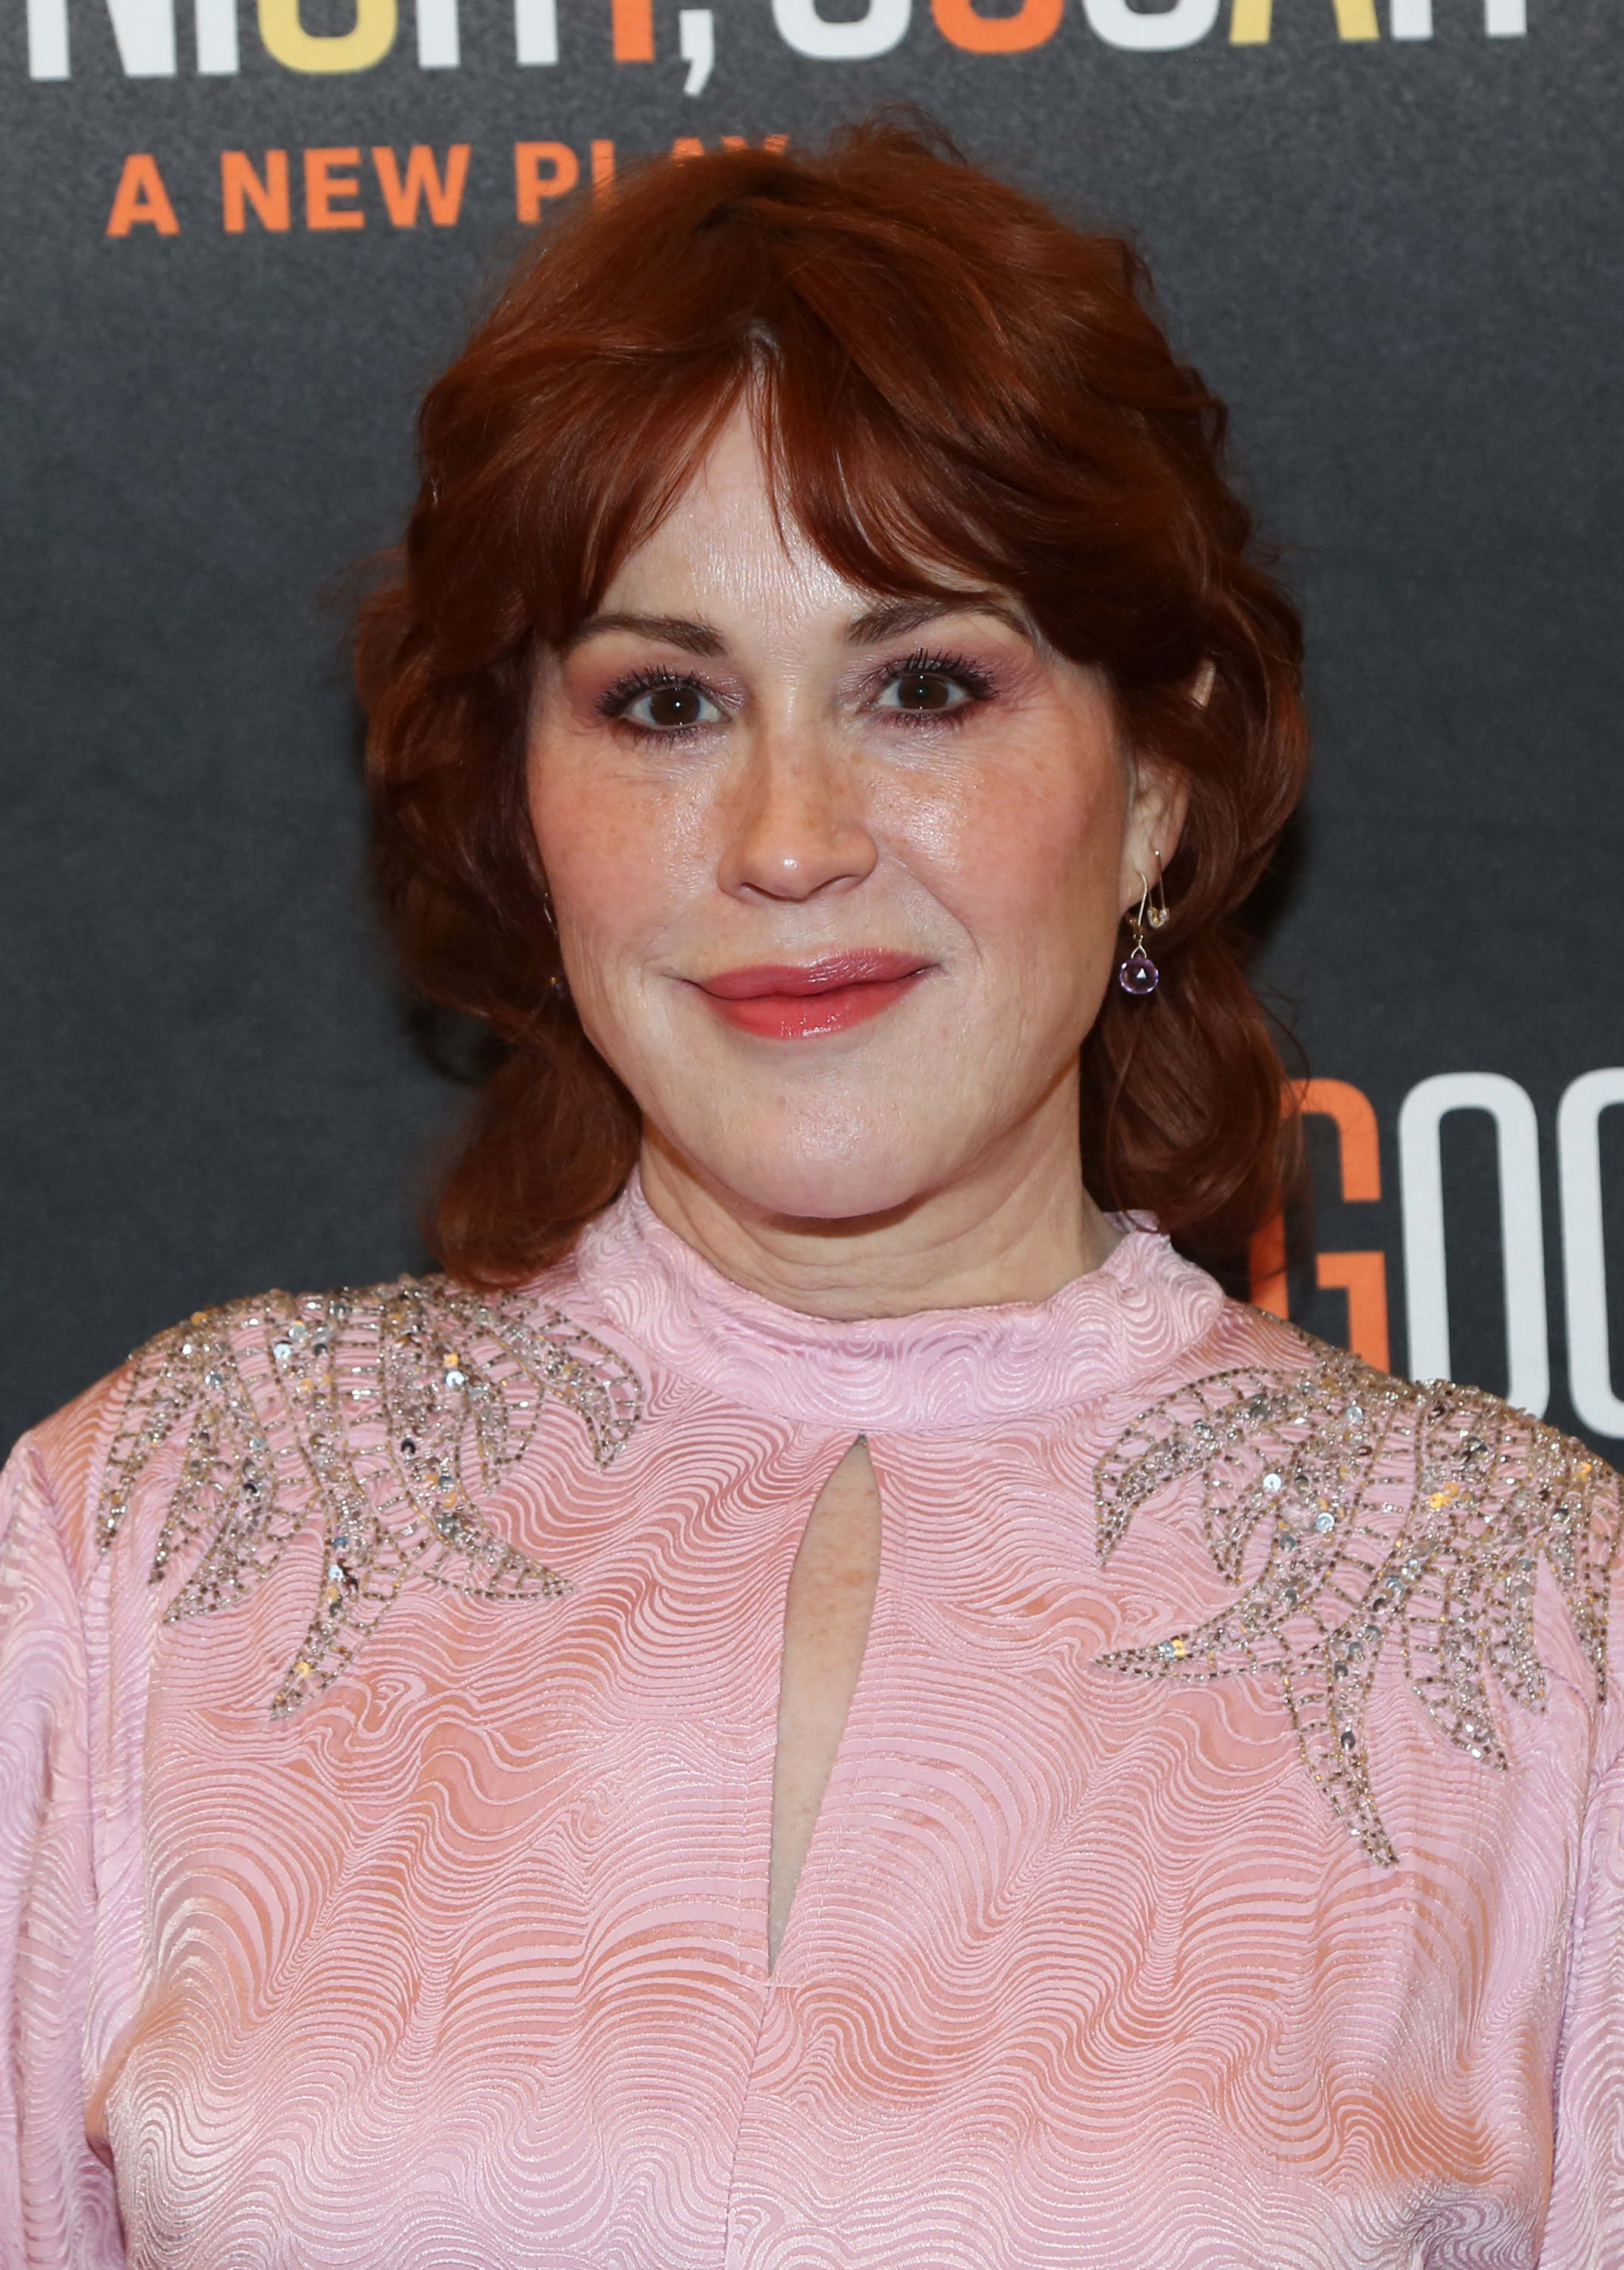 Molly Ringwald poses at the opening night of the new play "Goodnight, Oscar" on Broadway at The Belasco Theatre on April 24, 2023, in New York City | Source: Getty Images